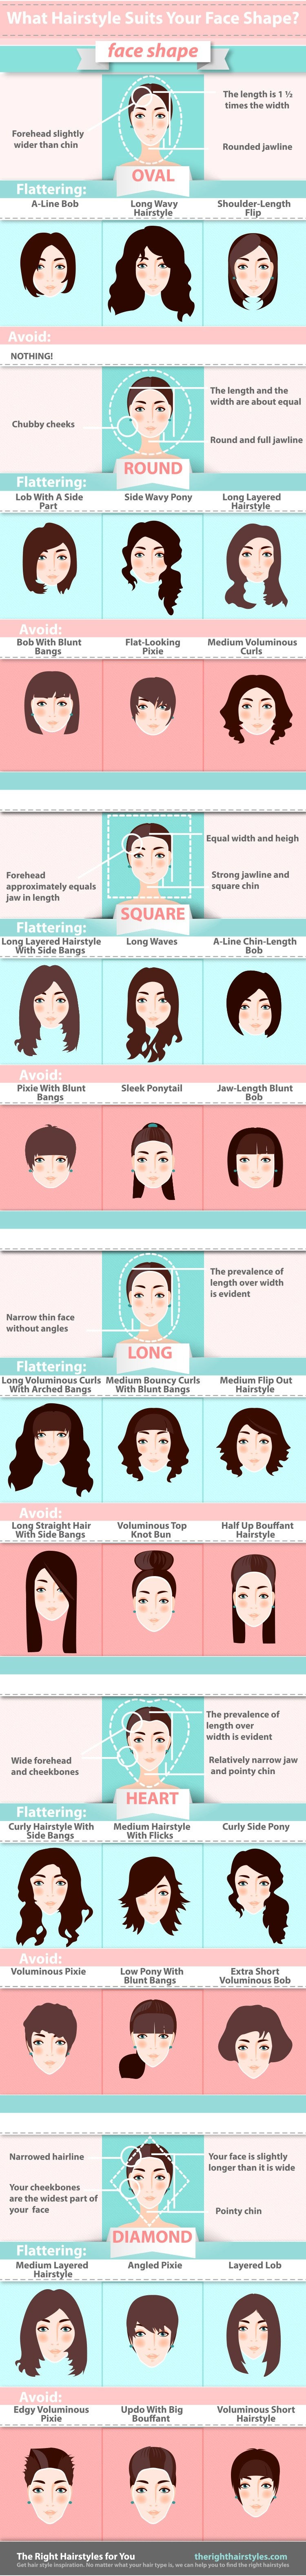 Vad Hairstyle Suits Your Face Shape